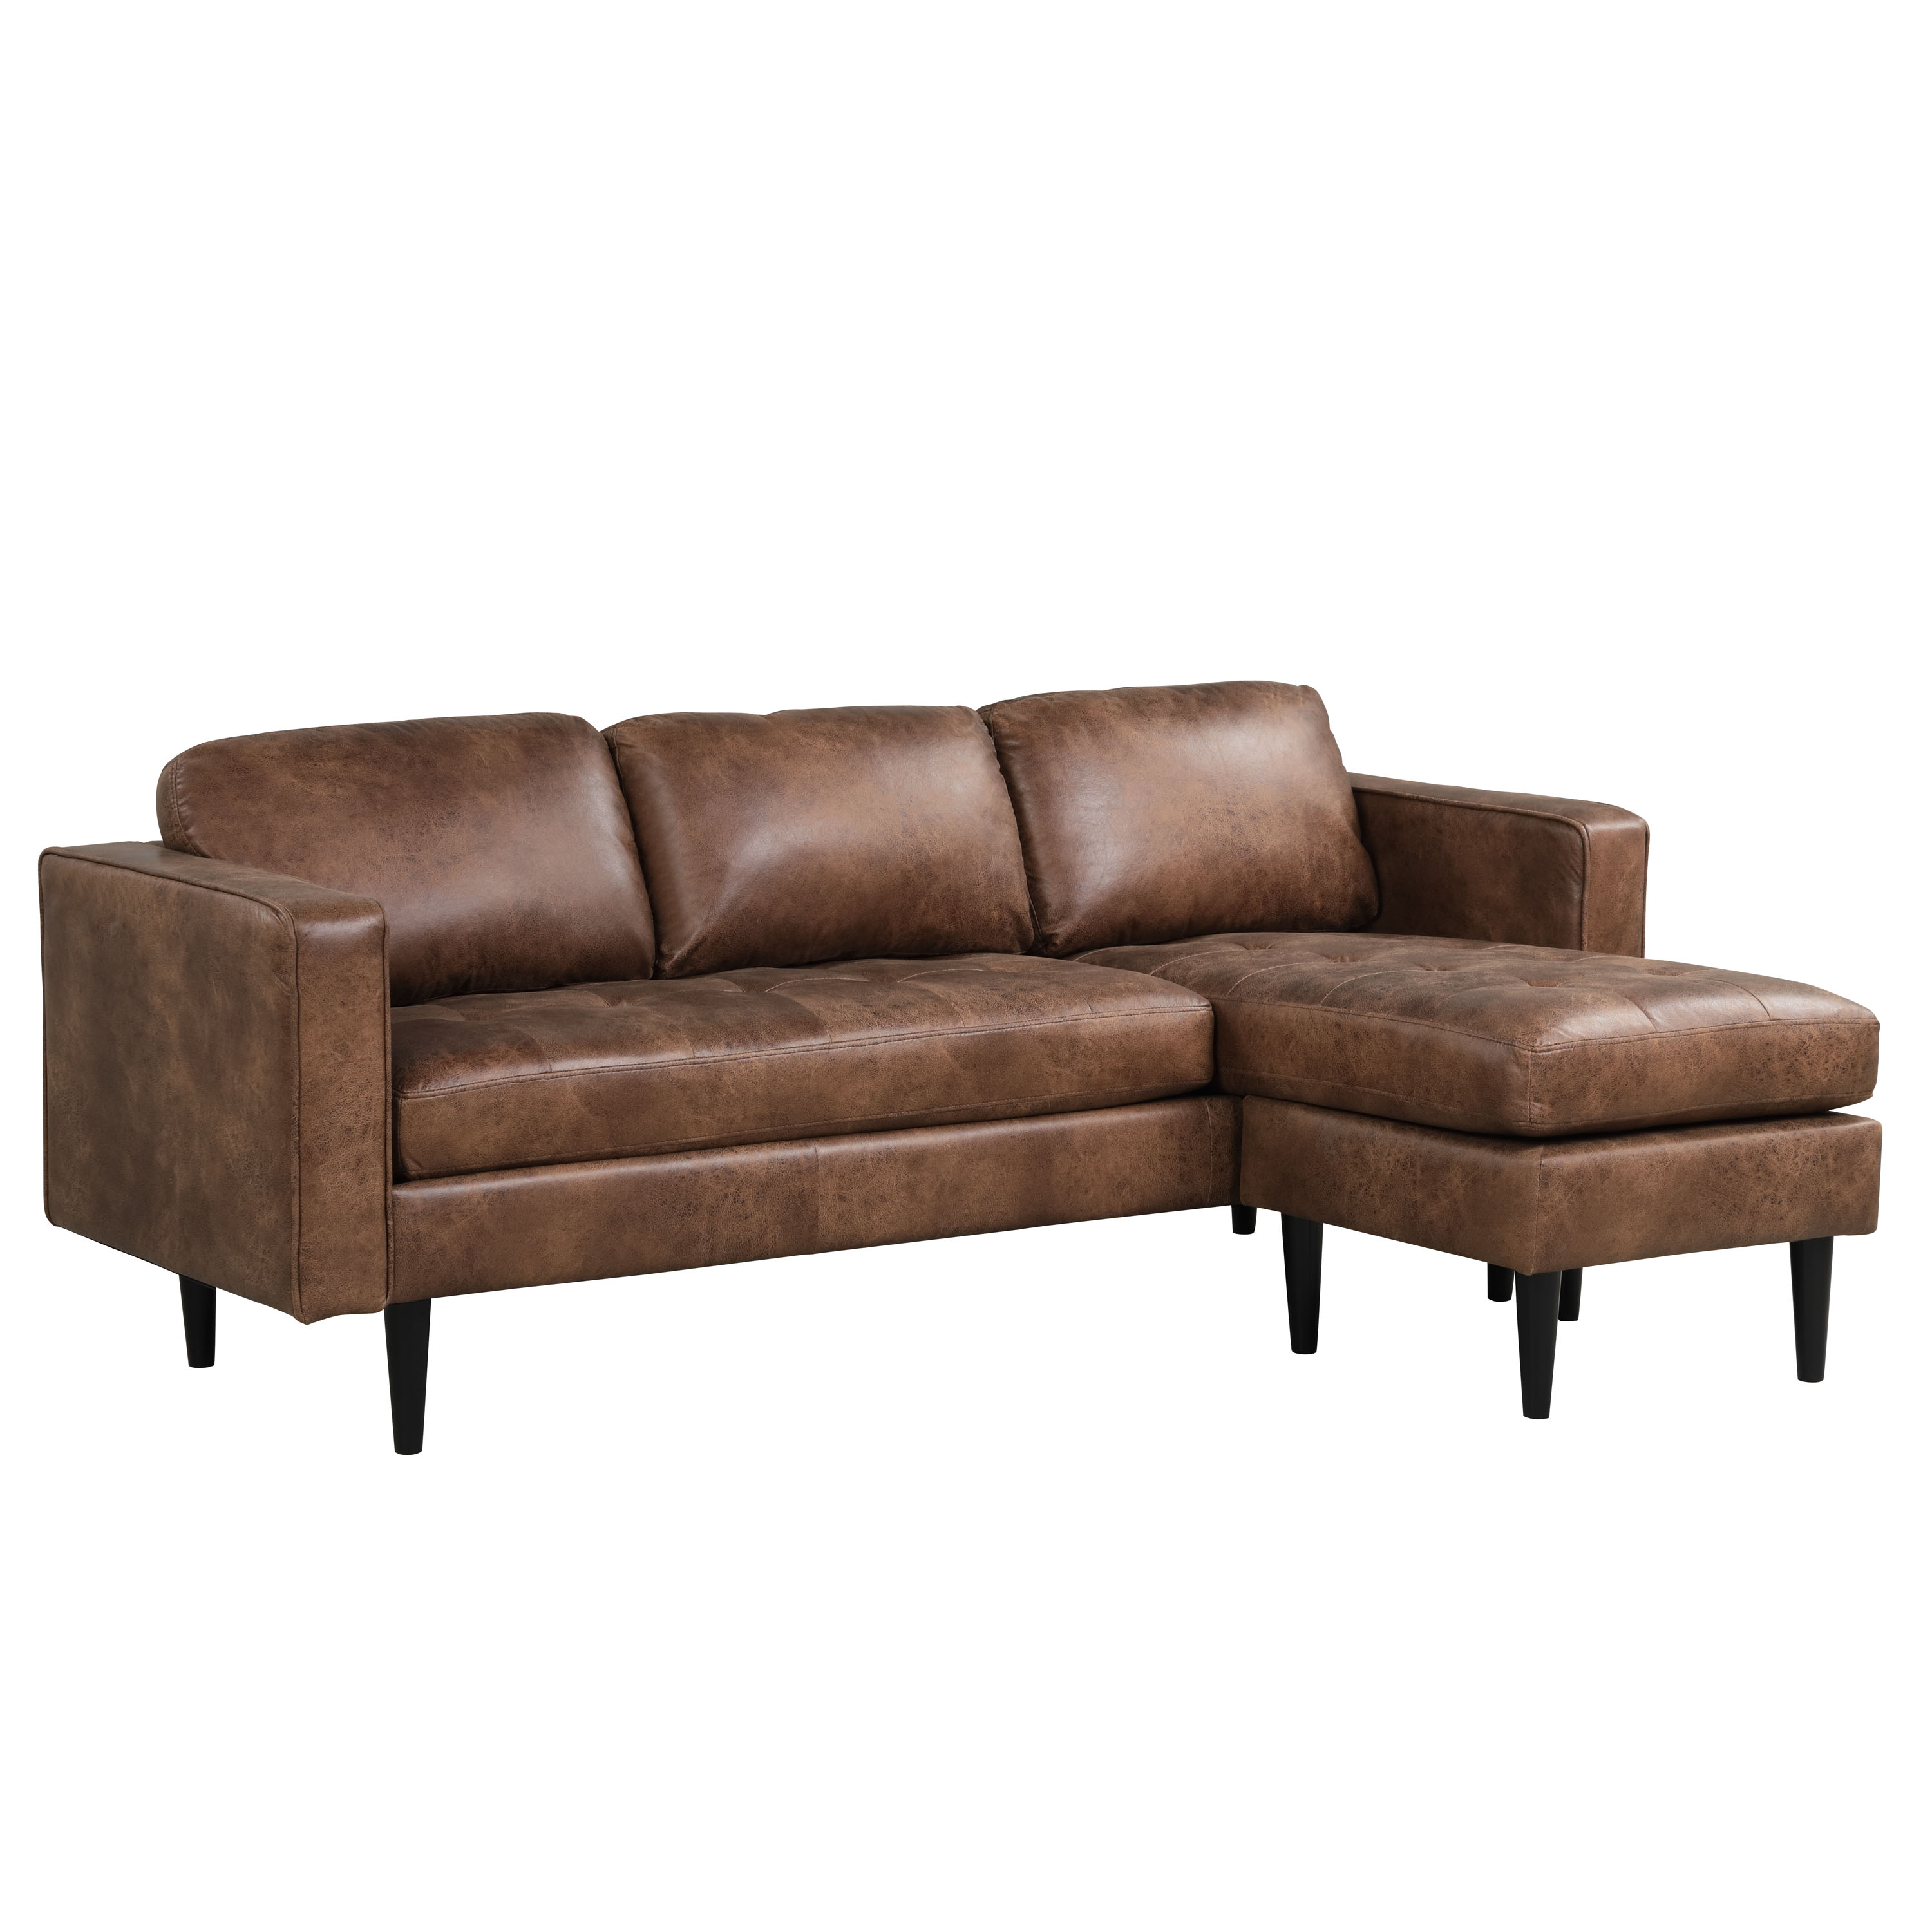 Lifestyle Solutions Manila Modern Sectional Sofa with Chaise, Brown Faux Leather - image 1 of 5